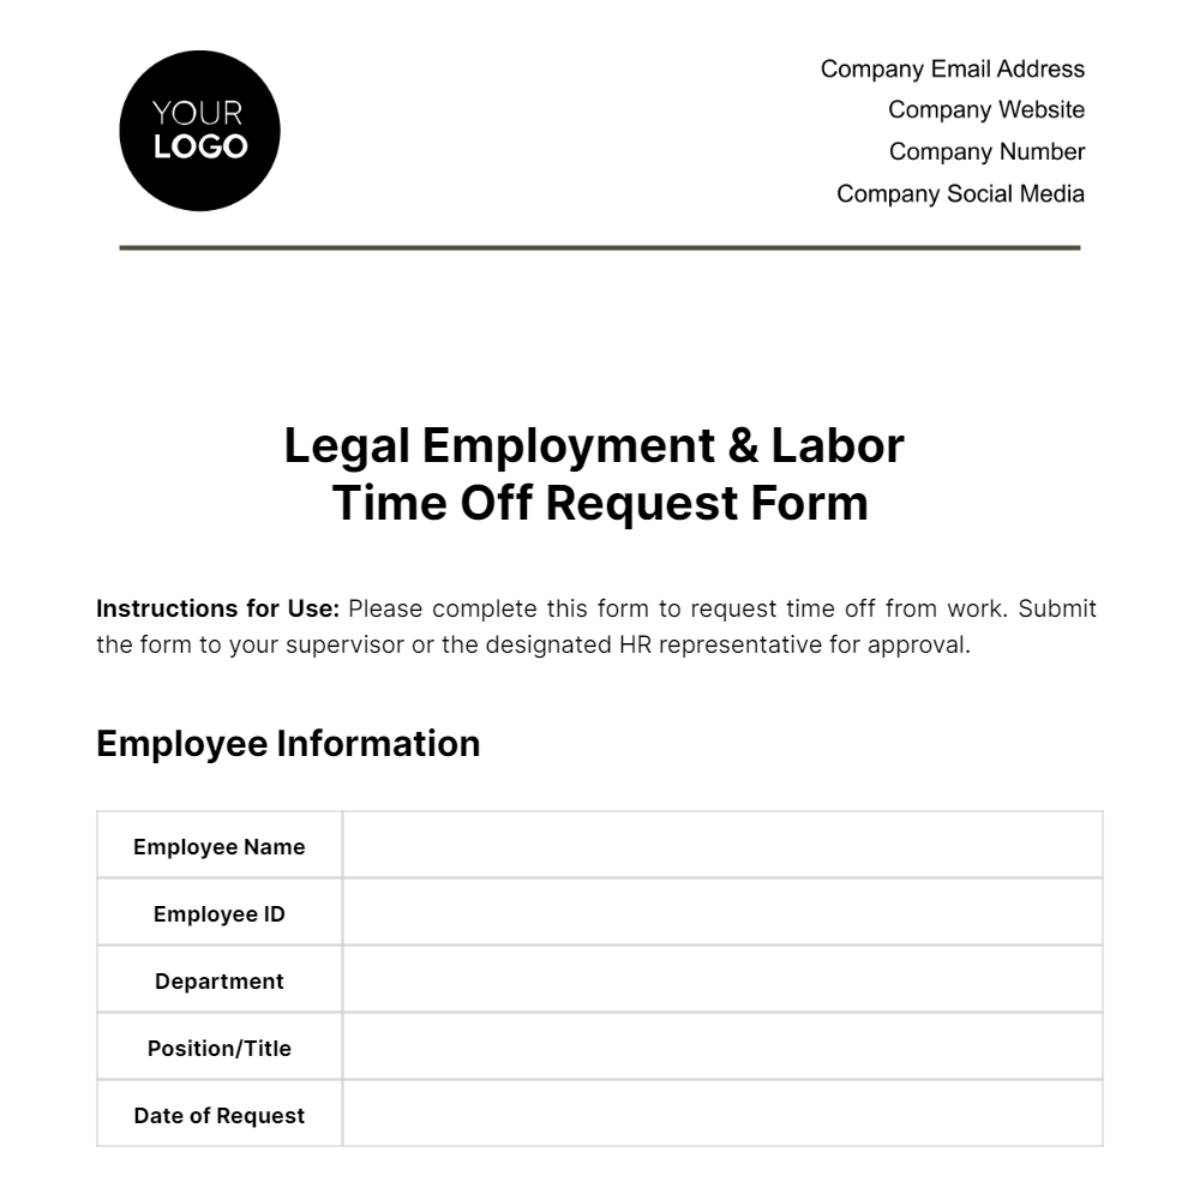 Legal Employment & Labor Time Off Request Form Template